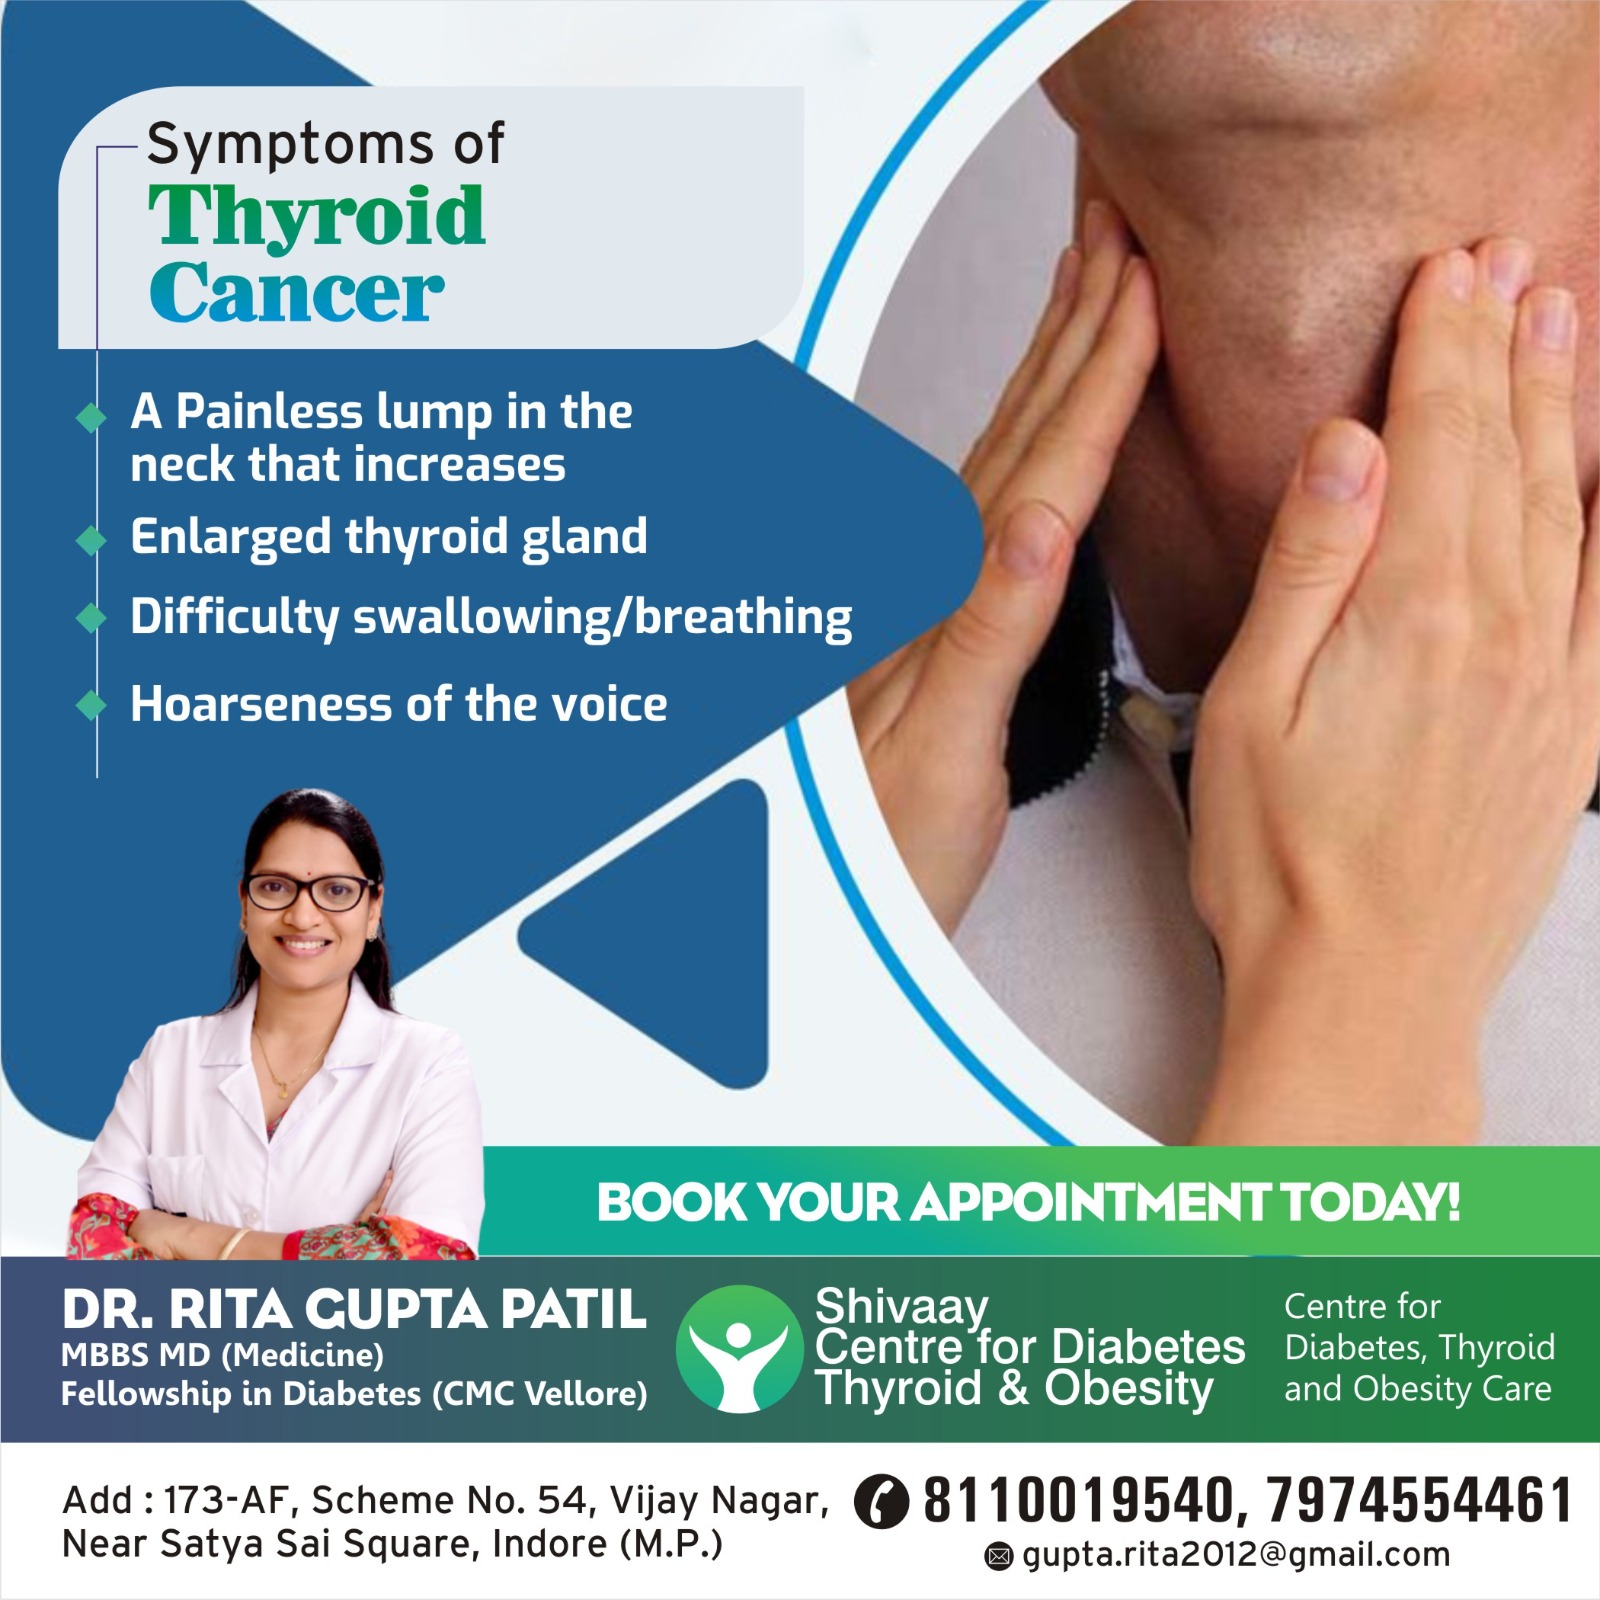 Best Doctor for Thyroid Treatment in Indore